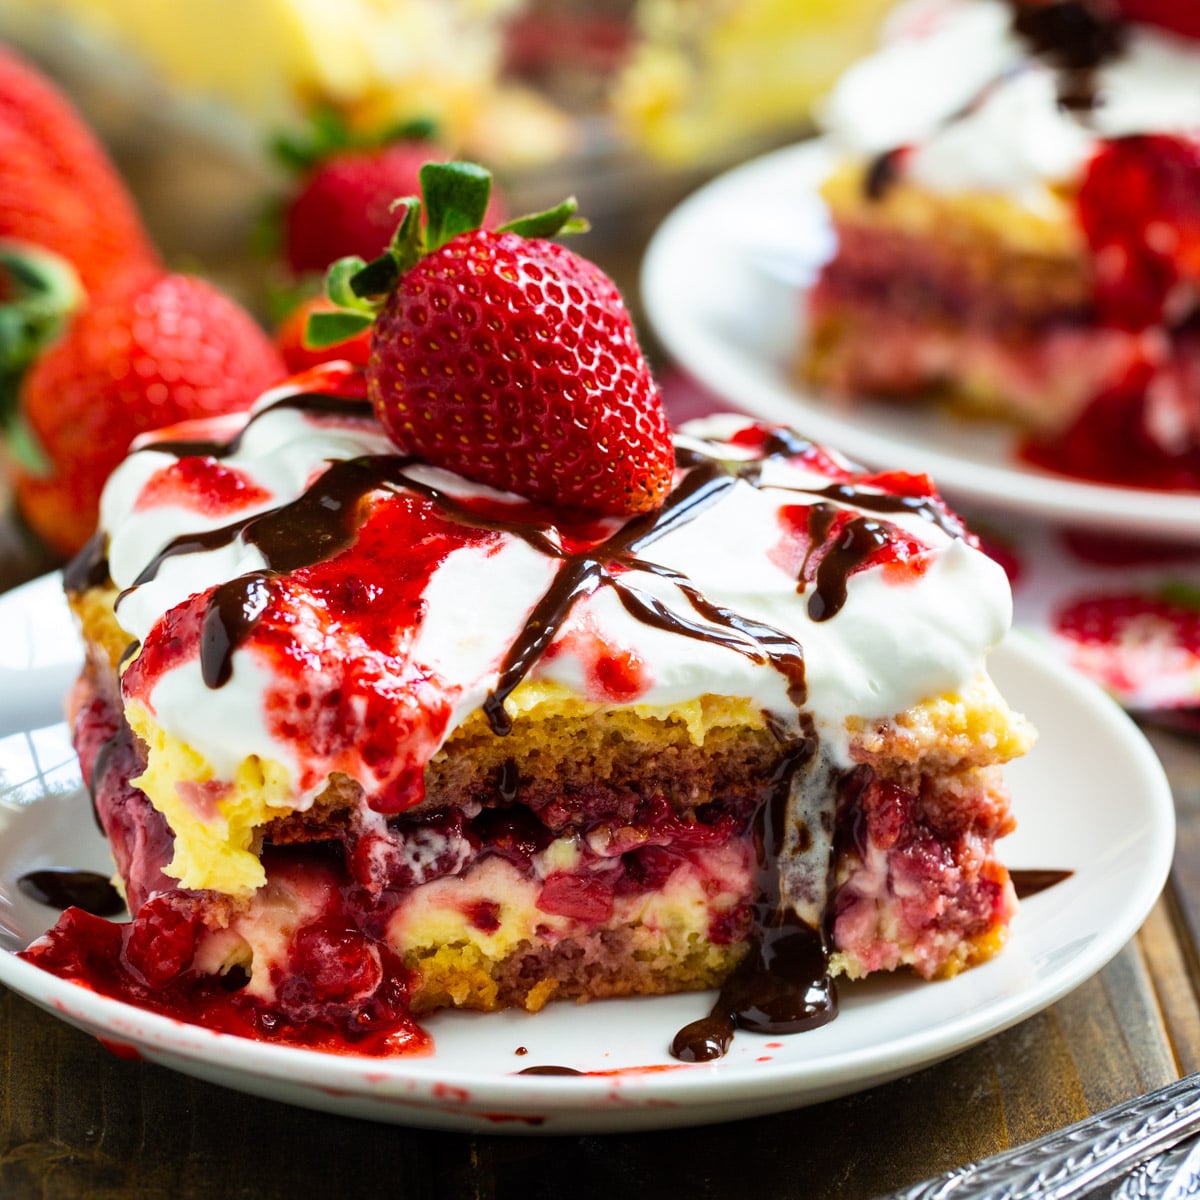 Slice of No-Bake Strawberry Lasagna on a plate.